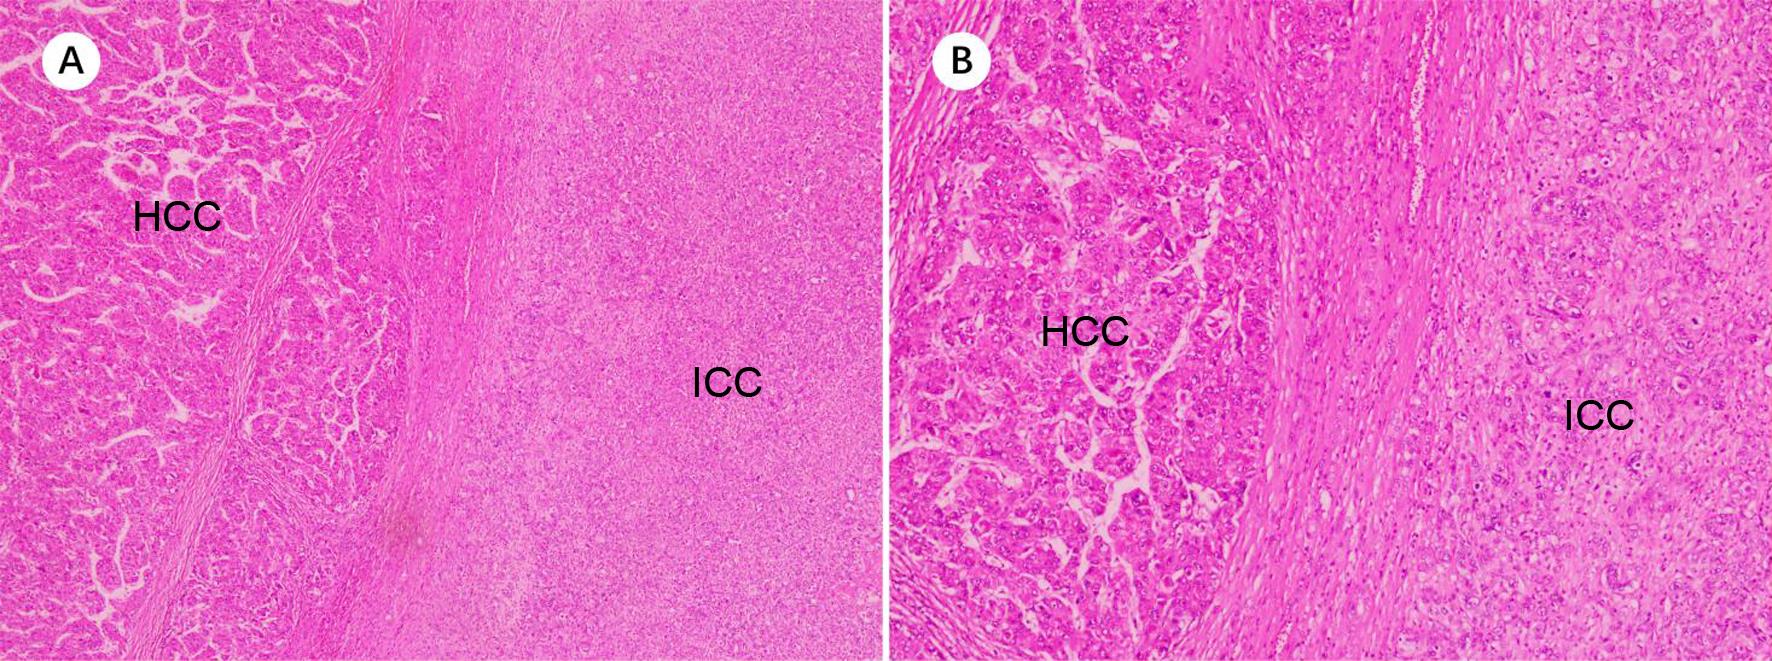 Combined hepatocellular cholangiocarcinoma without transition zone.